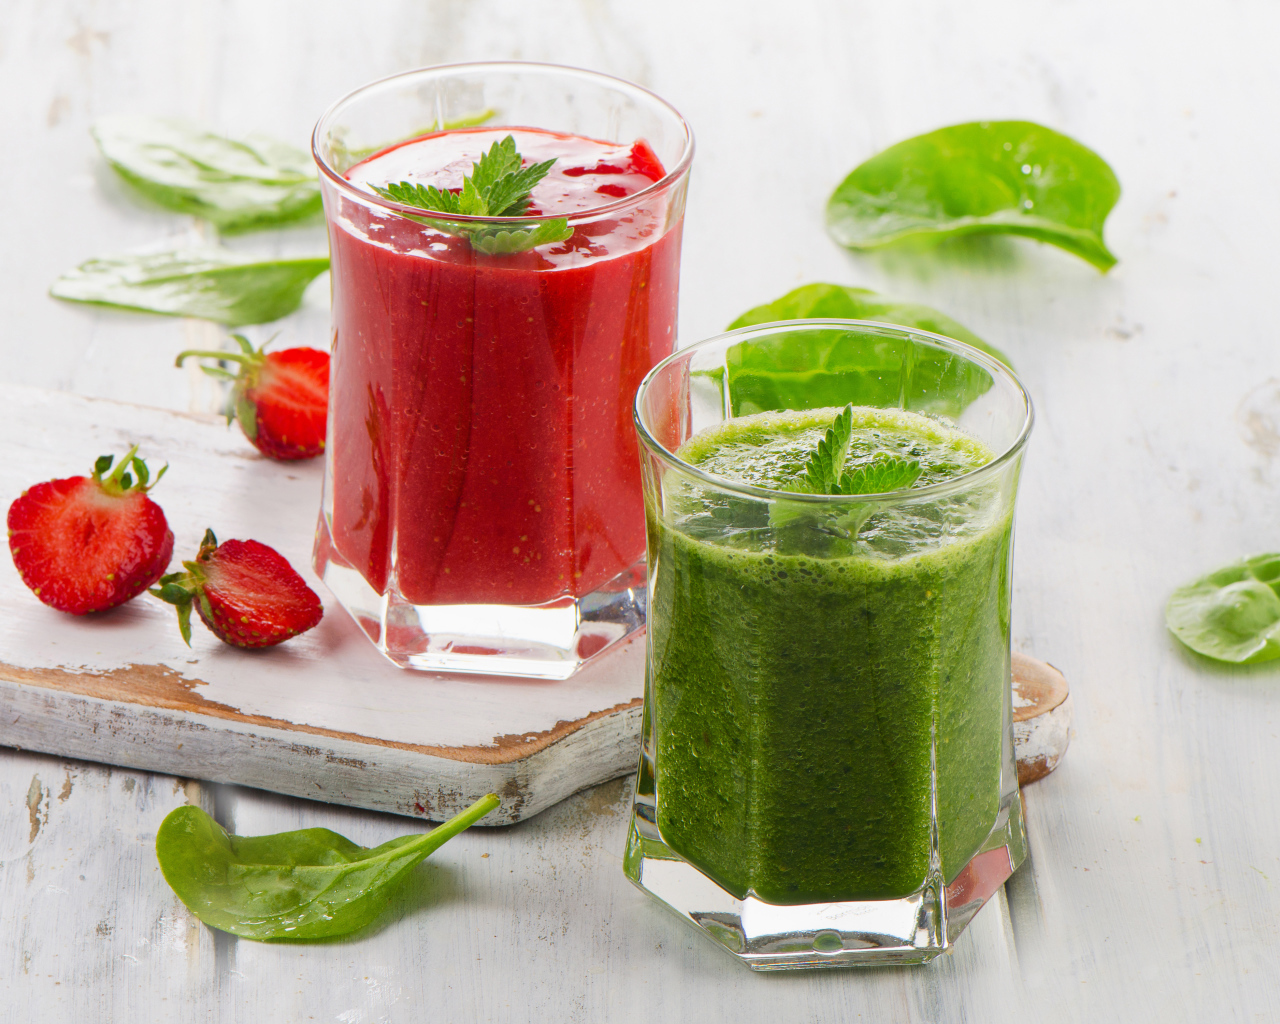 Two glass glasses with strawberry smoothies and smoothies with spinach